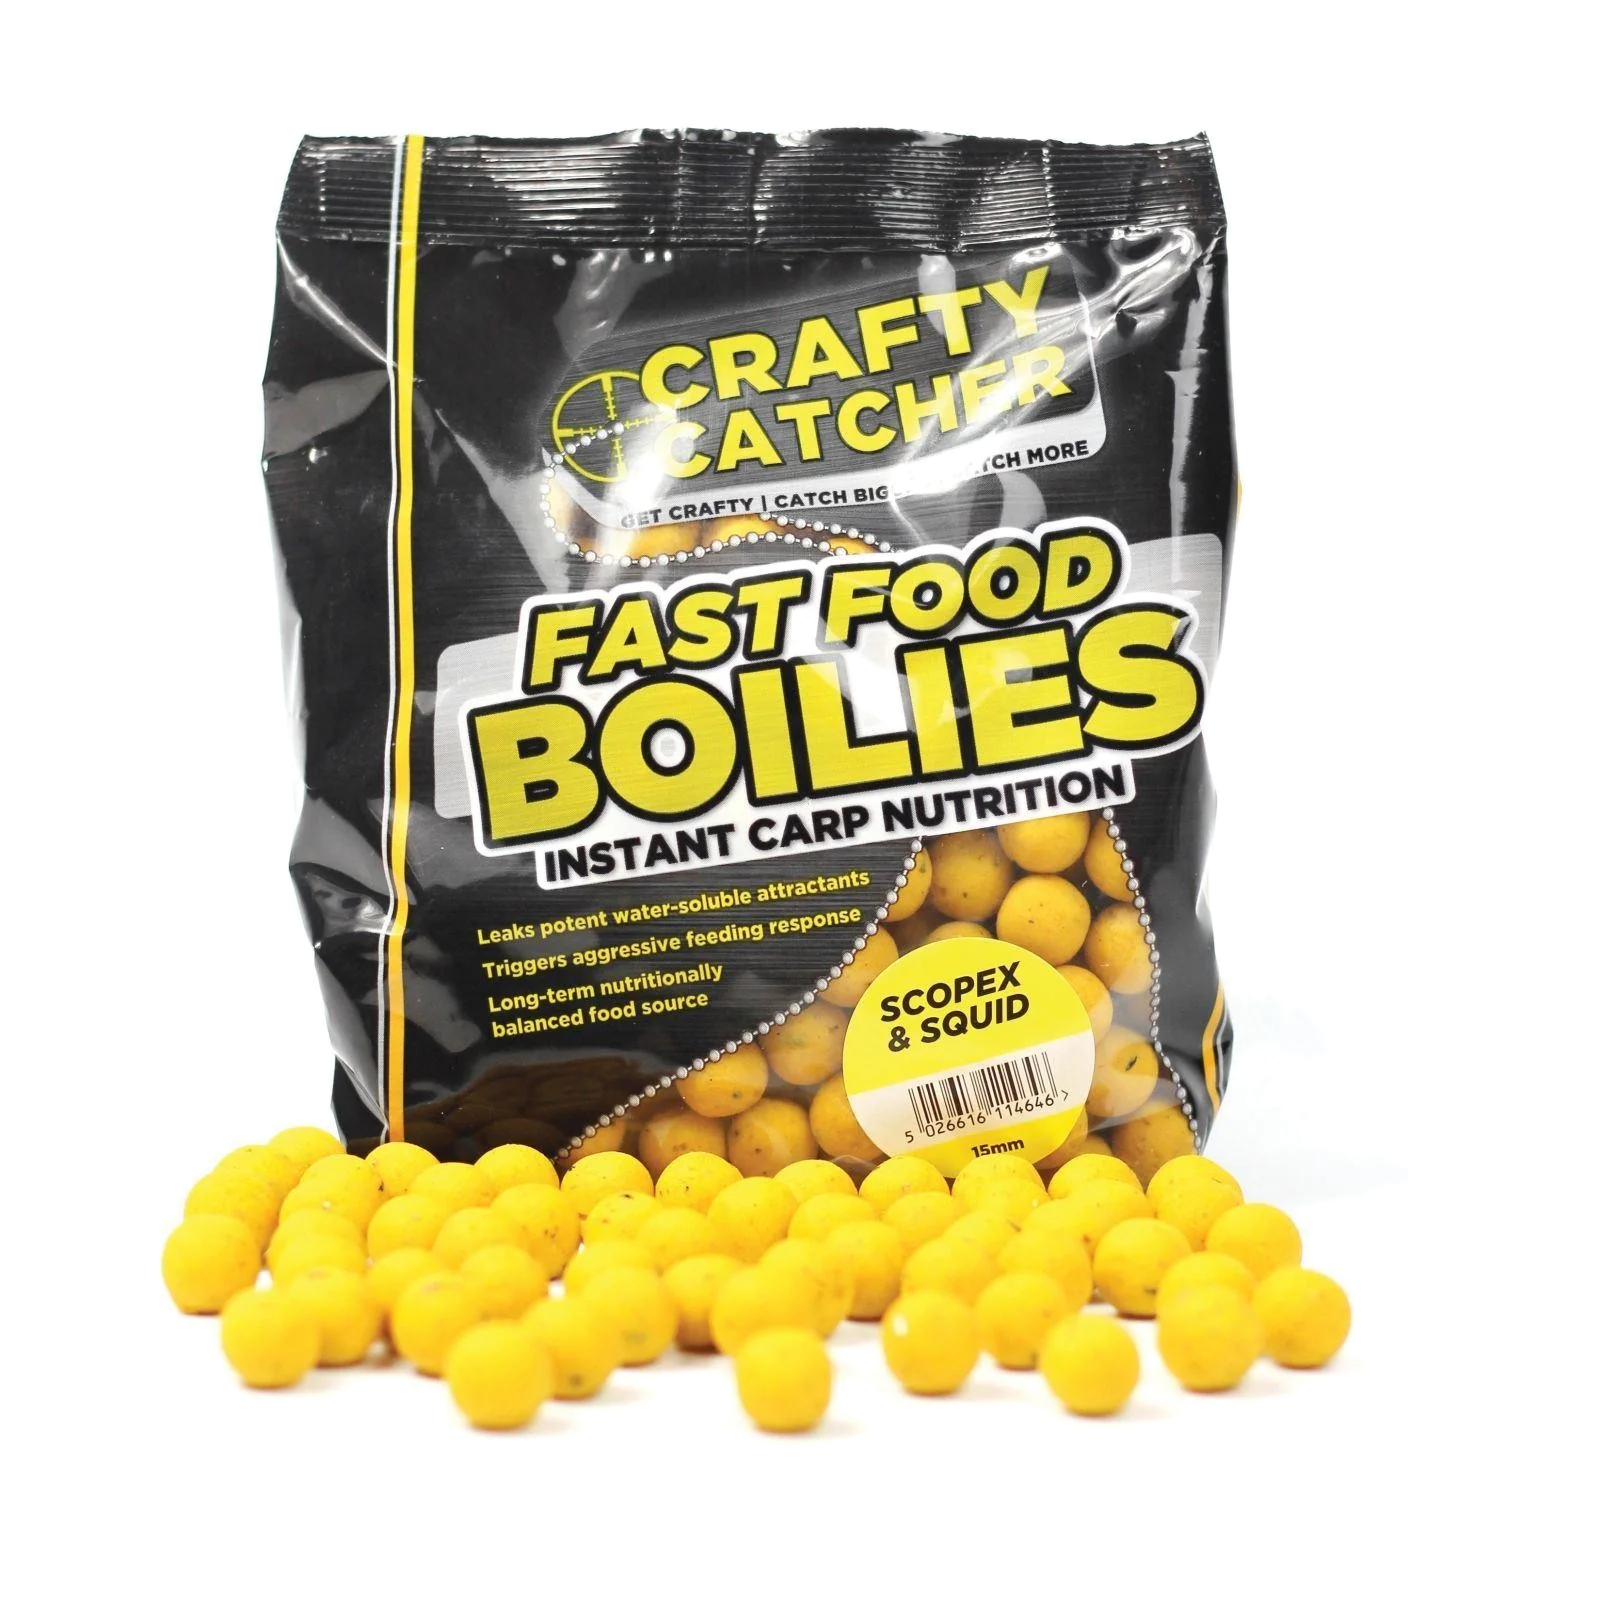 https://baitsuperstore.com/wp-content/uploads/2023/03/CC-Fast-Food-Boilies-Scopex-Squid.png